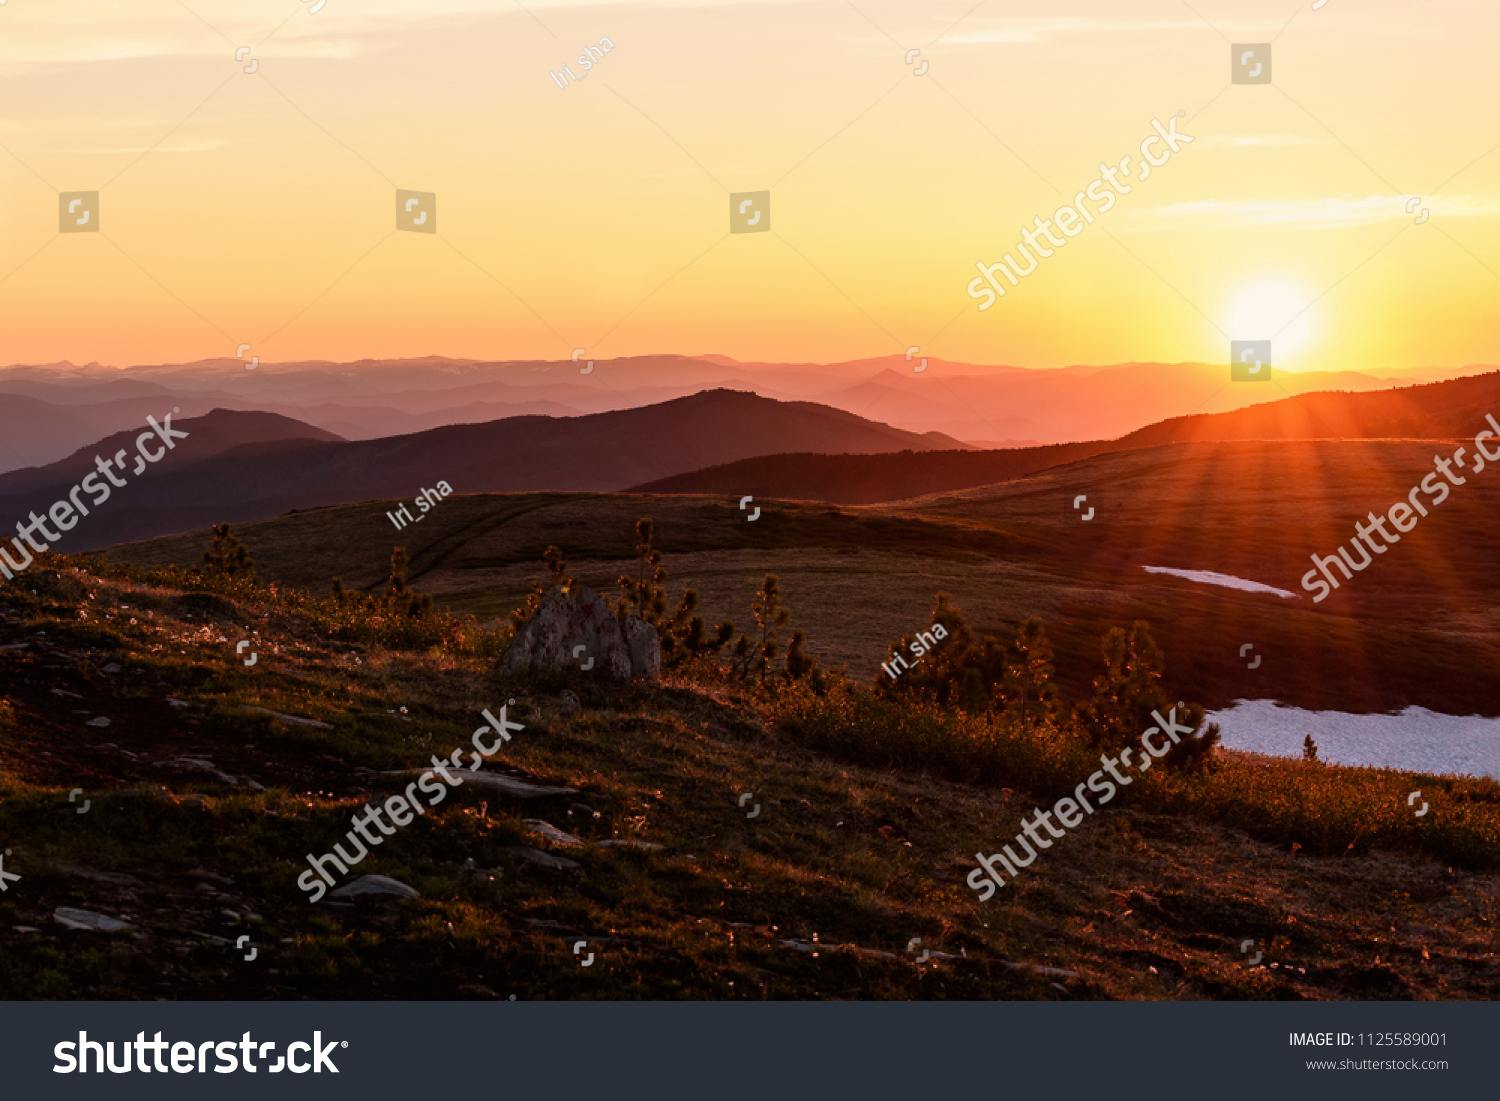 Beautiful sunset with rays over the contours of mountains with stones, small cedars and snow in the foreground #1125589001